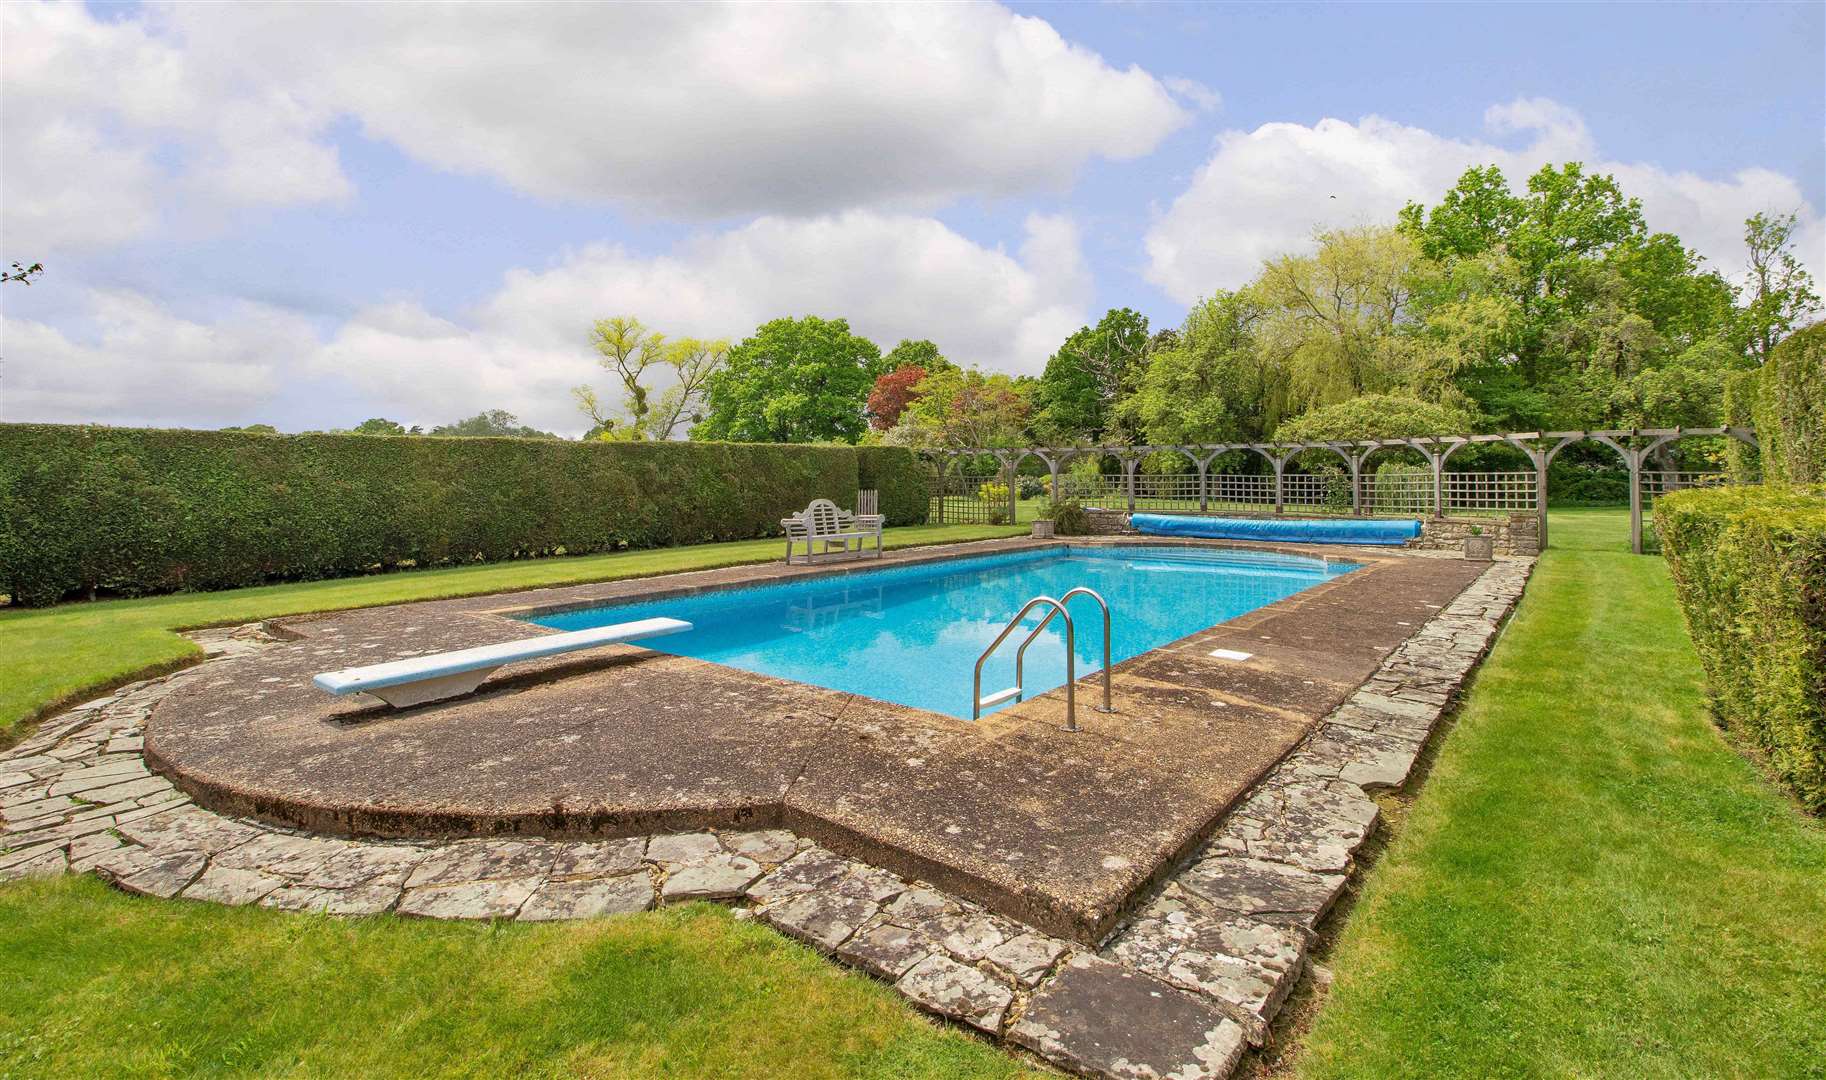 The outdoor pool is heated and tucked away behind the hedging. Picture: Savills